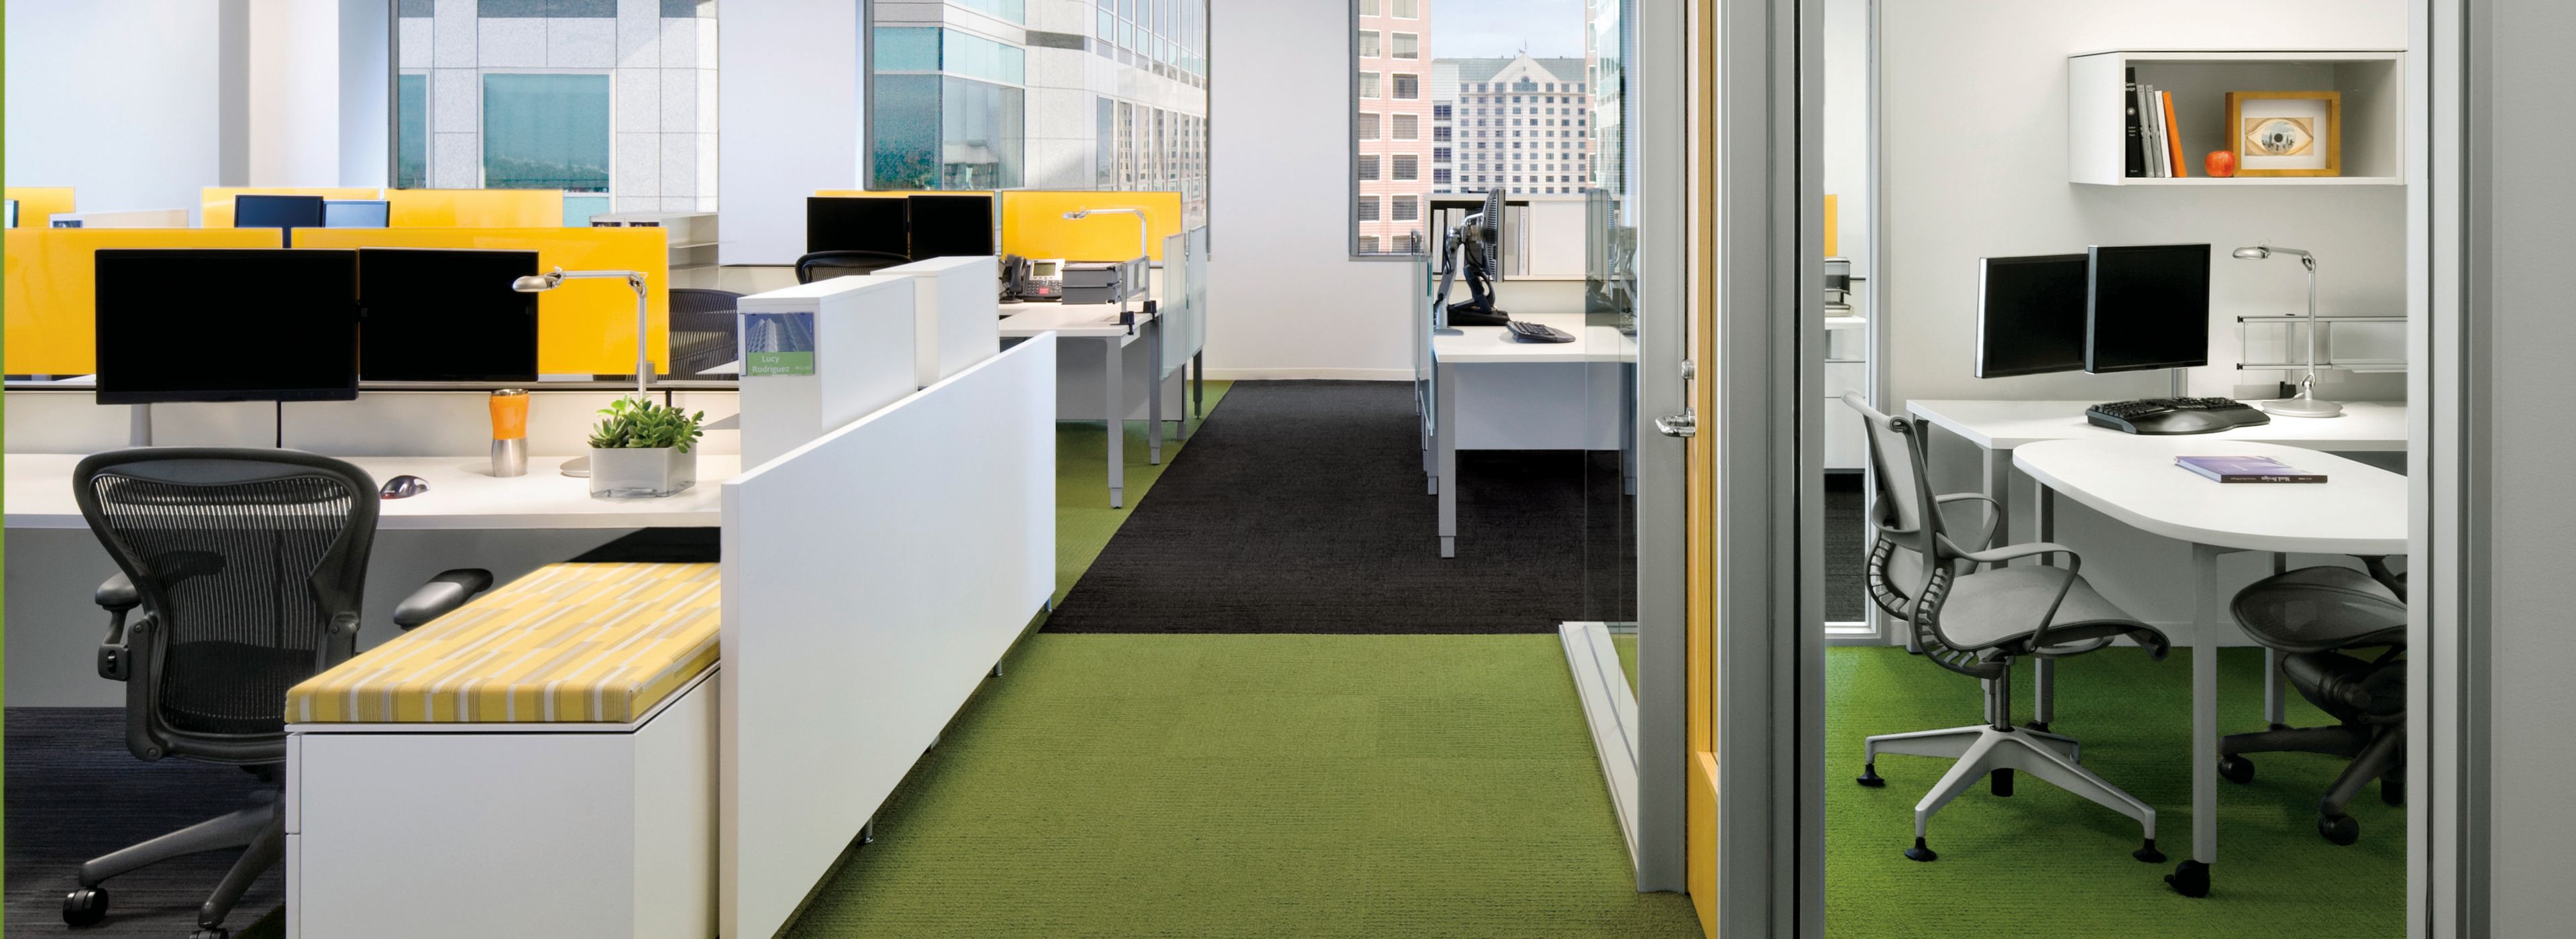 Interface Monochrome and Striation carpet tile in walkway of office with multiple open offices and a private office número de imagen 1